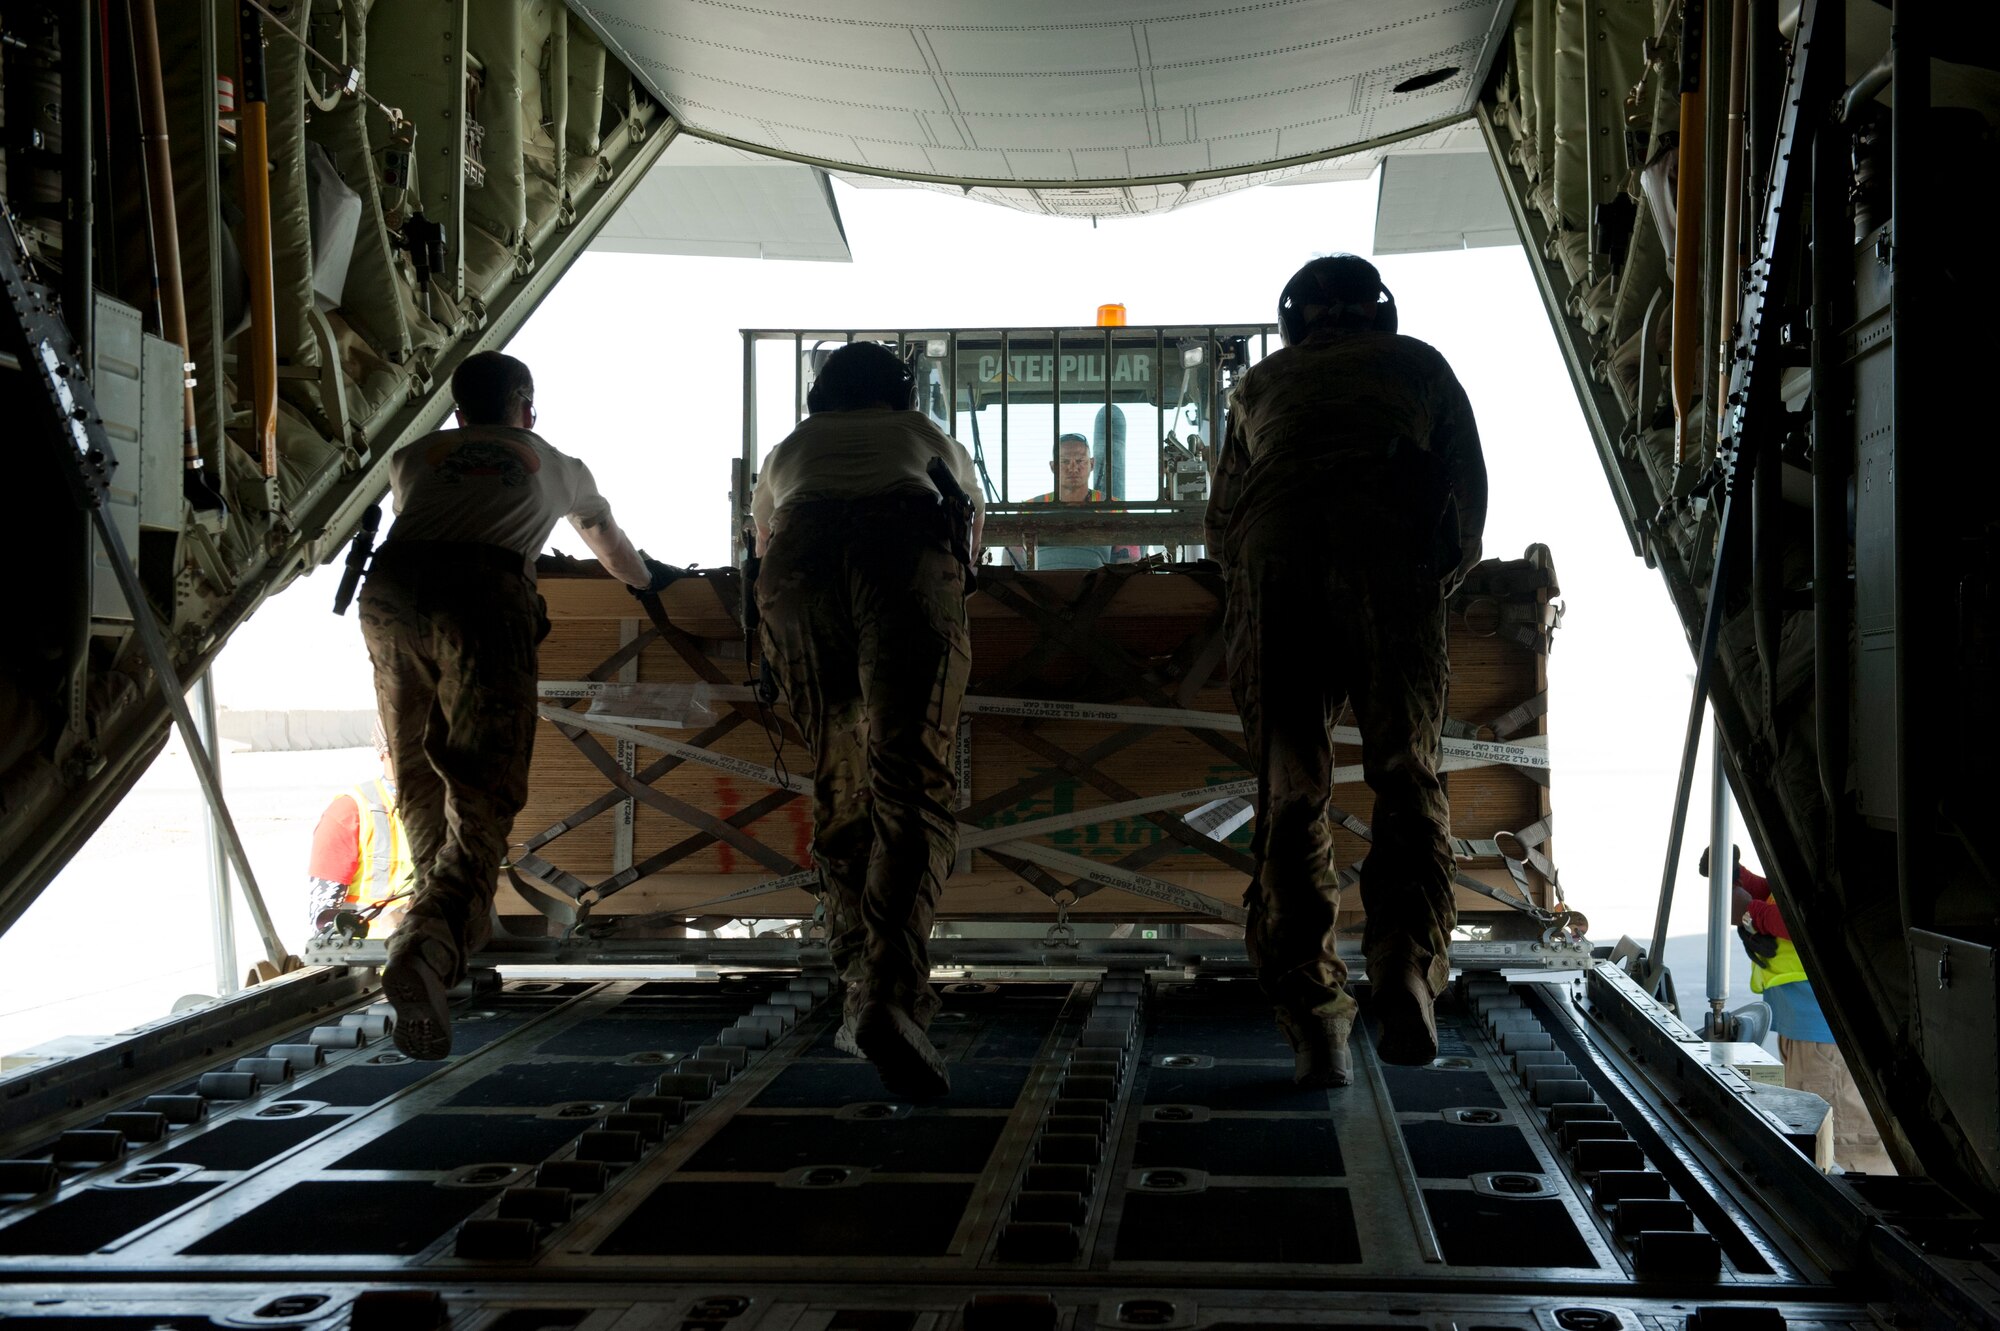 Loadmasters from the 774th Expeditionary Airlift Squadron offload a pallet of cargo onto a forklift at Camp Dywer, Afghanistan, Aug. 19, 2016. The C-130J Super Hercules is one of the primary aircraft used to deliver cargo and other
assets from the aerial port at Bagram Airfield, Afghanistan to other bases throughout the country. (U.S. Air Force photo by Capt. Korey Fratini)